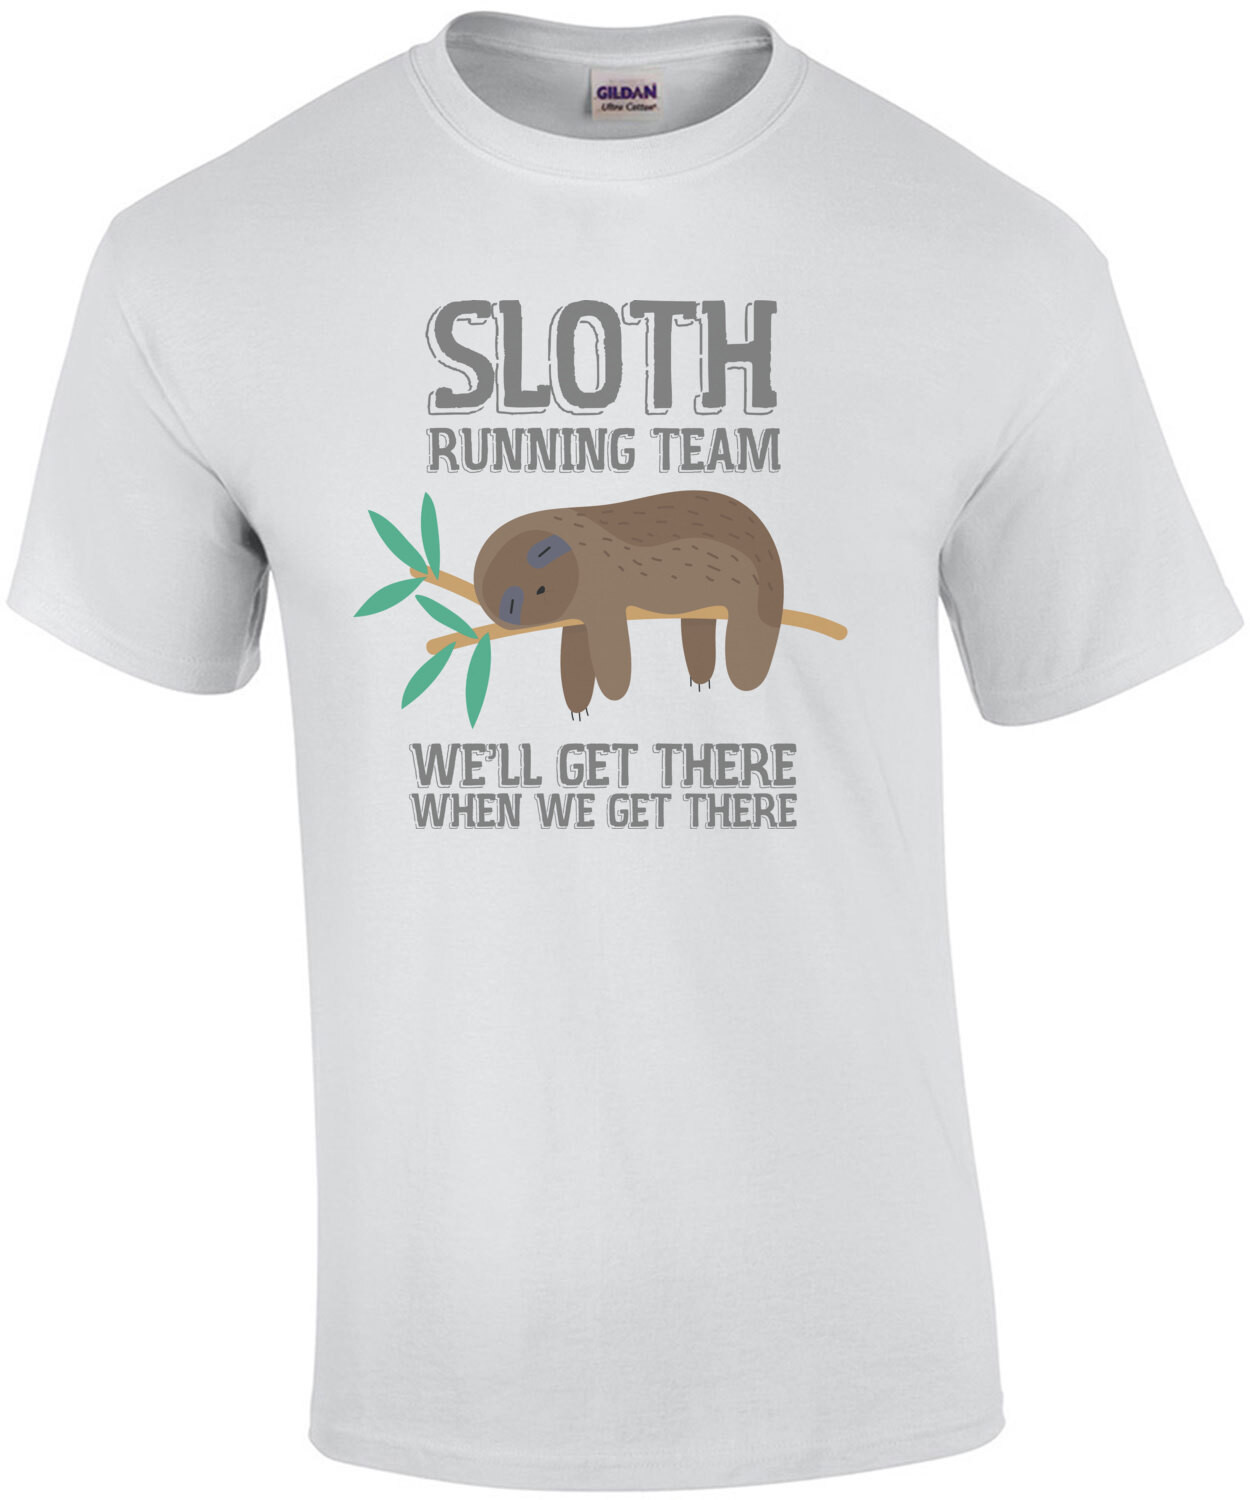 Sloth Running team - we'll get there when we get there - funny sloth t-shirt